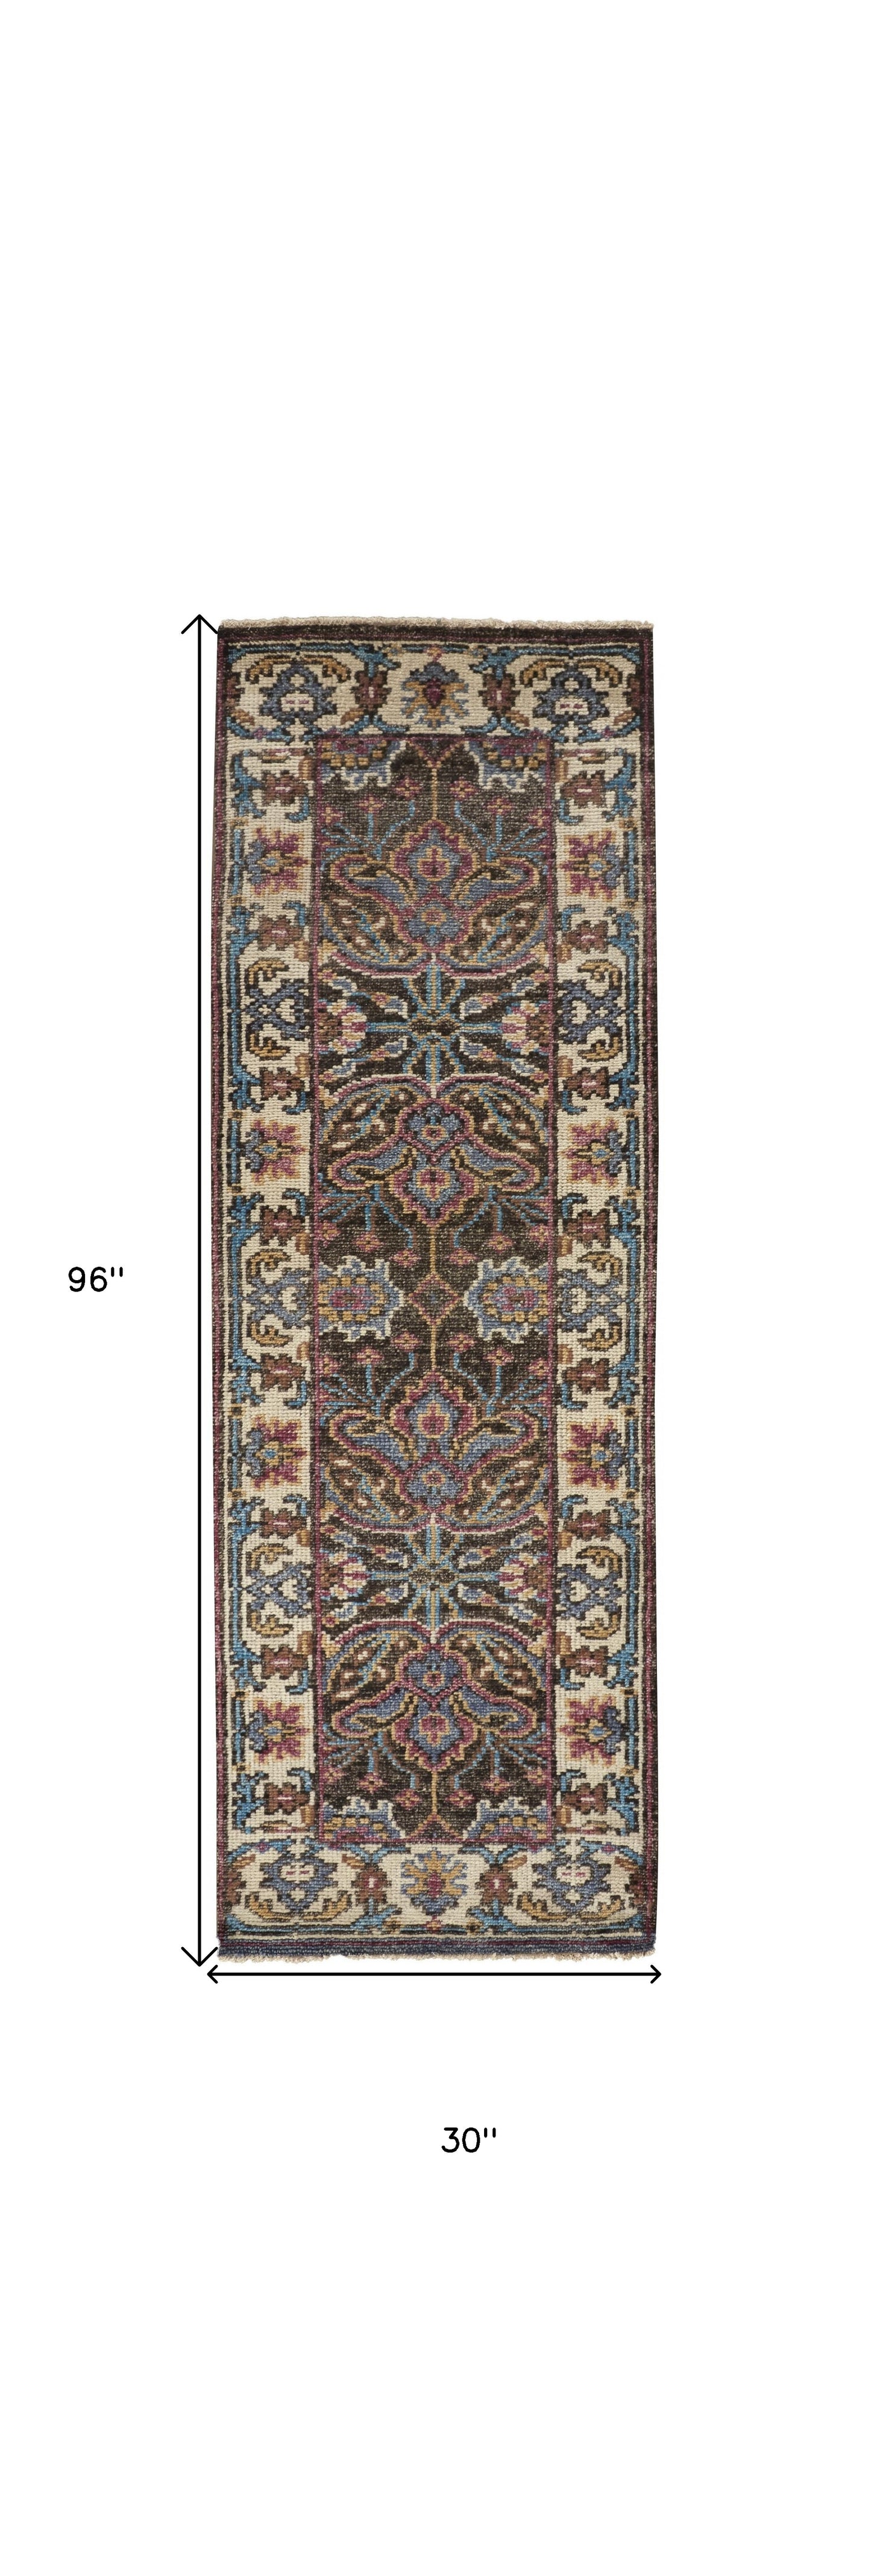 5' X 8' Ivory Brown And Blue Wool Floral Hand Knotted Distressed Stain Resistant Area Rug With Fringe